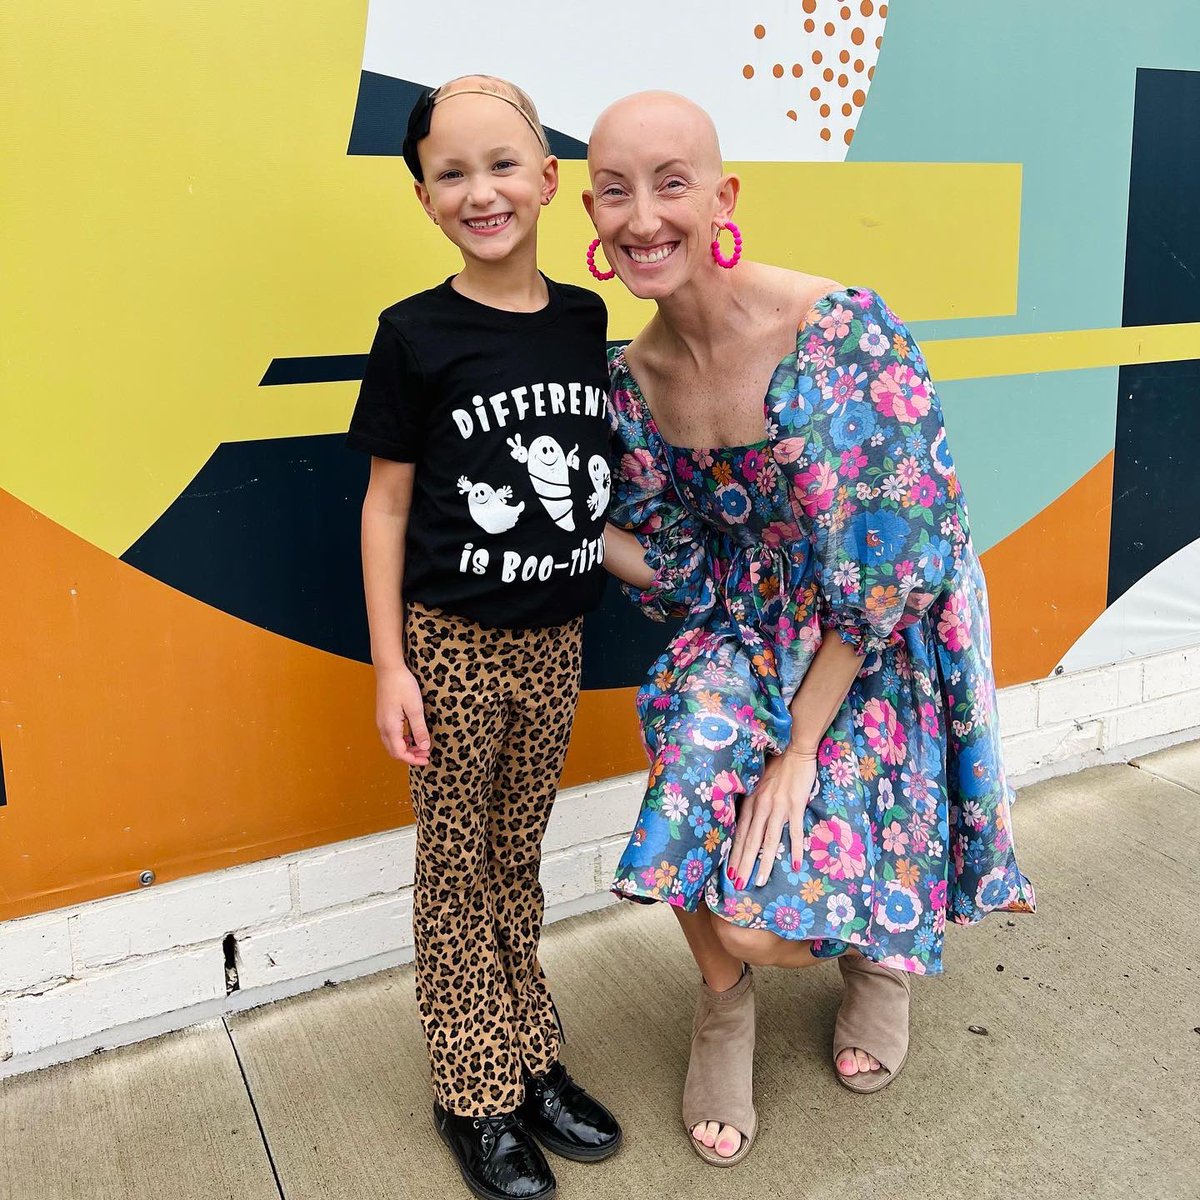 These are my favorite days. Getting to be the person I needed when I was younger is the greatest feeling in this world. 

My heart is so happy 🩷 

#baldisbeautiful #alopecia